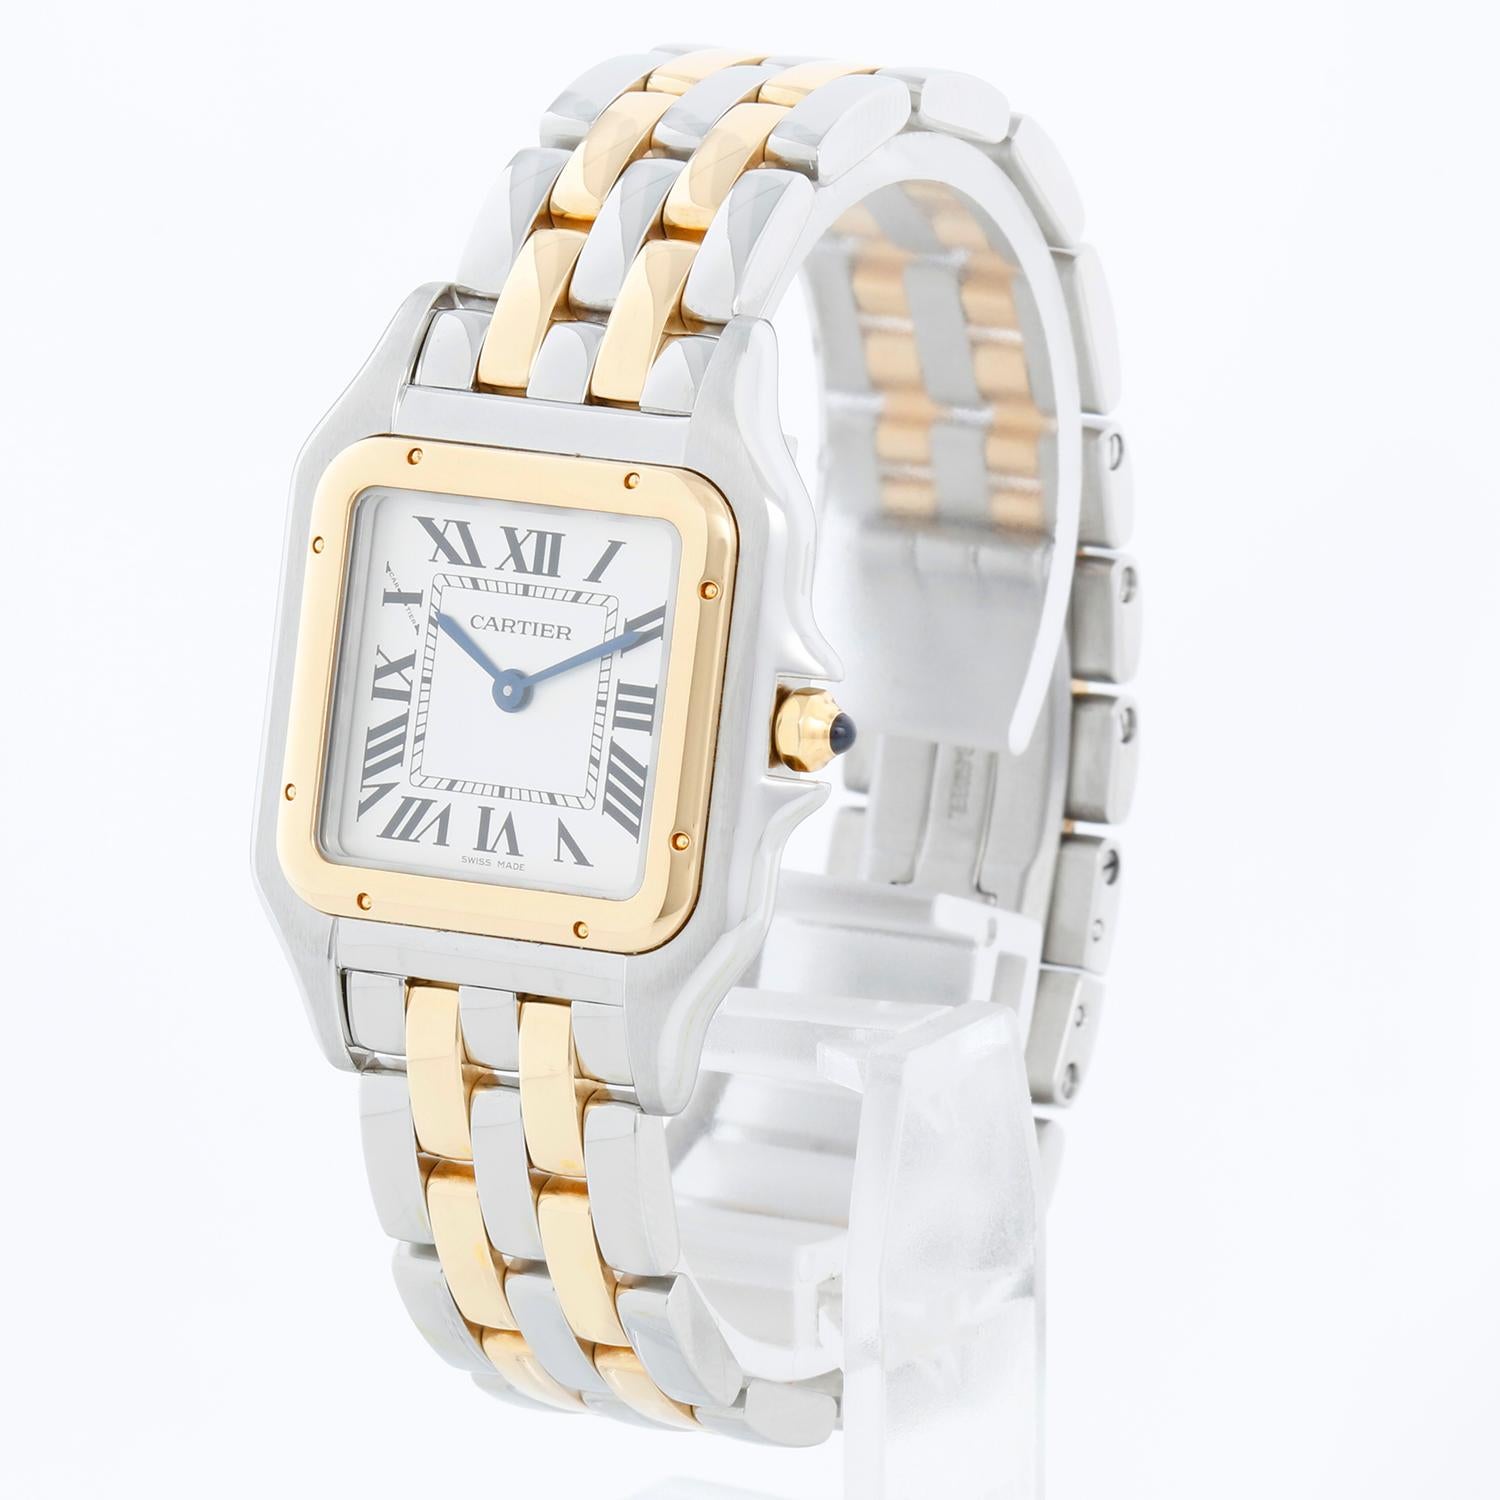 New Style Cartier Panthere 2-Tone 2-Row Medium Watch W2PN0007 - Quartz. Stainless steel case with 18k yellow gold bezel ( 29mm x 37mm ). Silver colored dial with black Roman numerals. Stainless steel and 2-row 18k yellow gold Panthere bracelet.